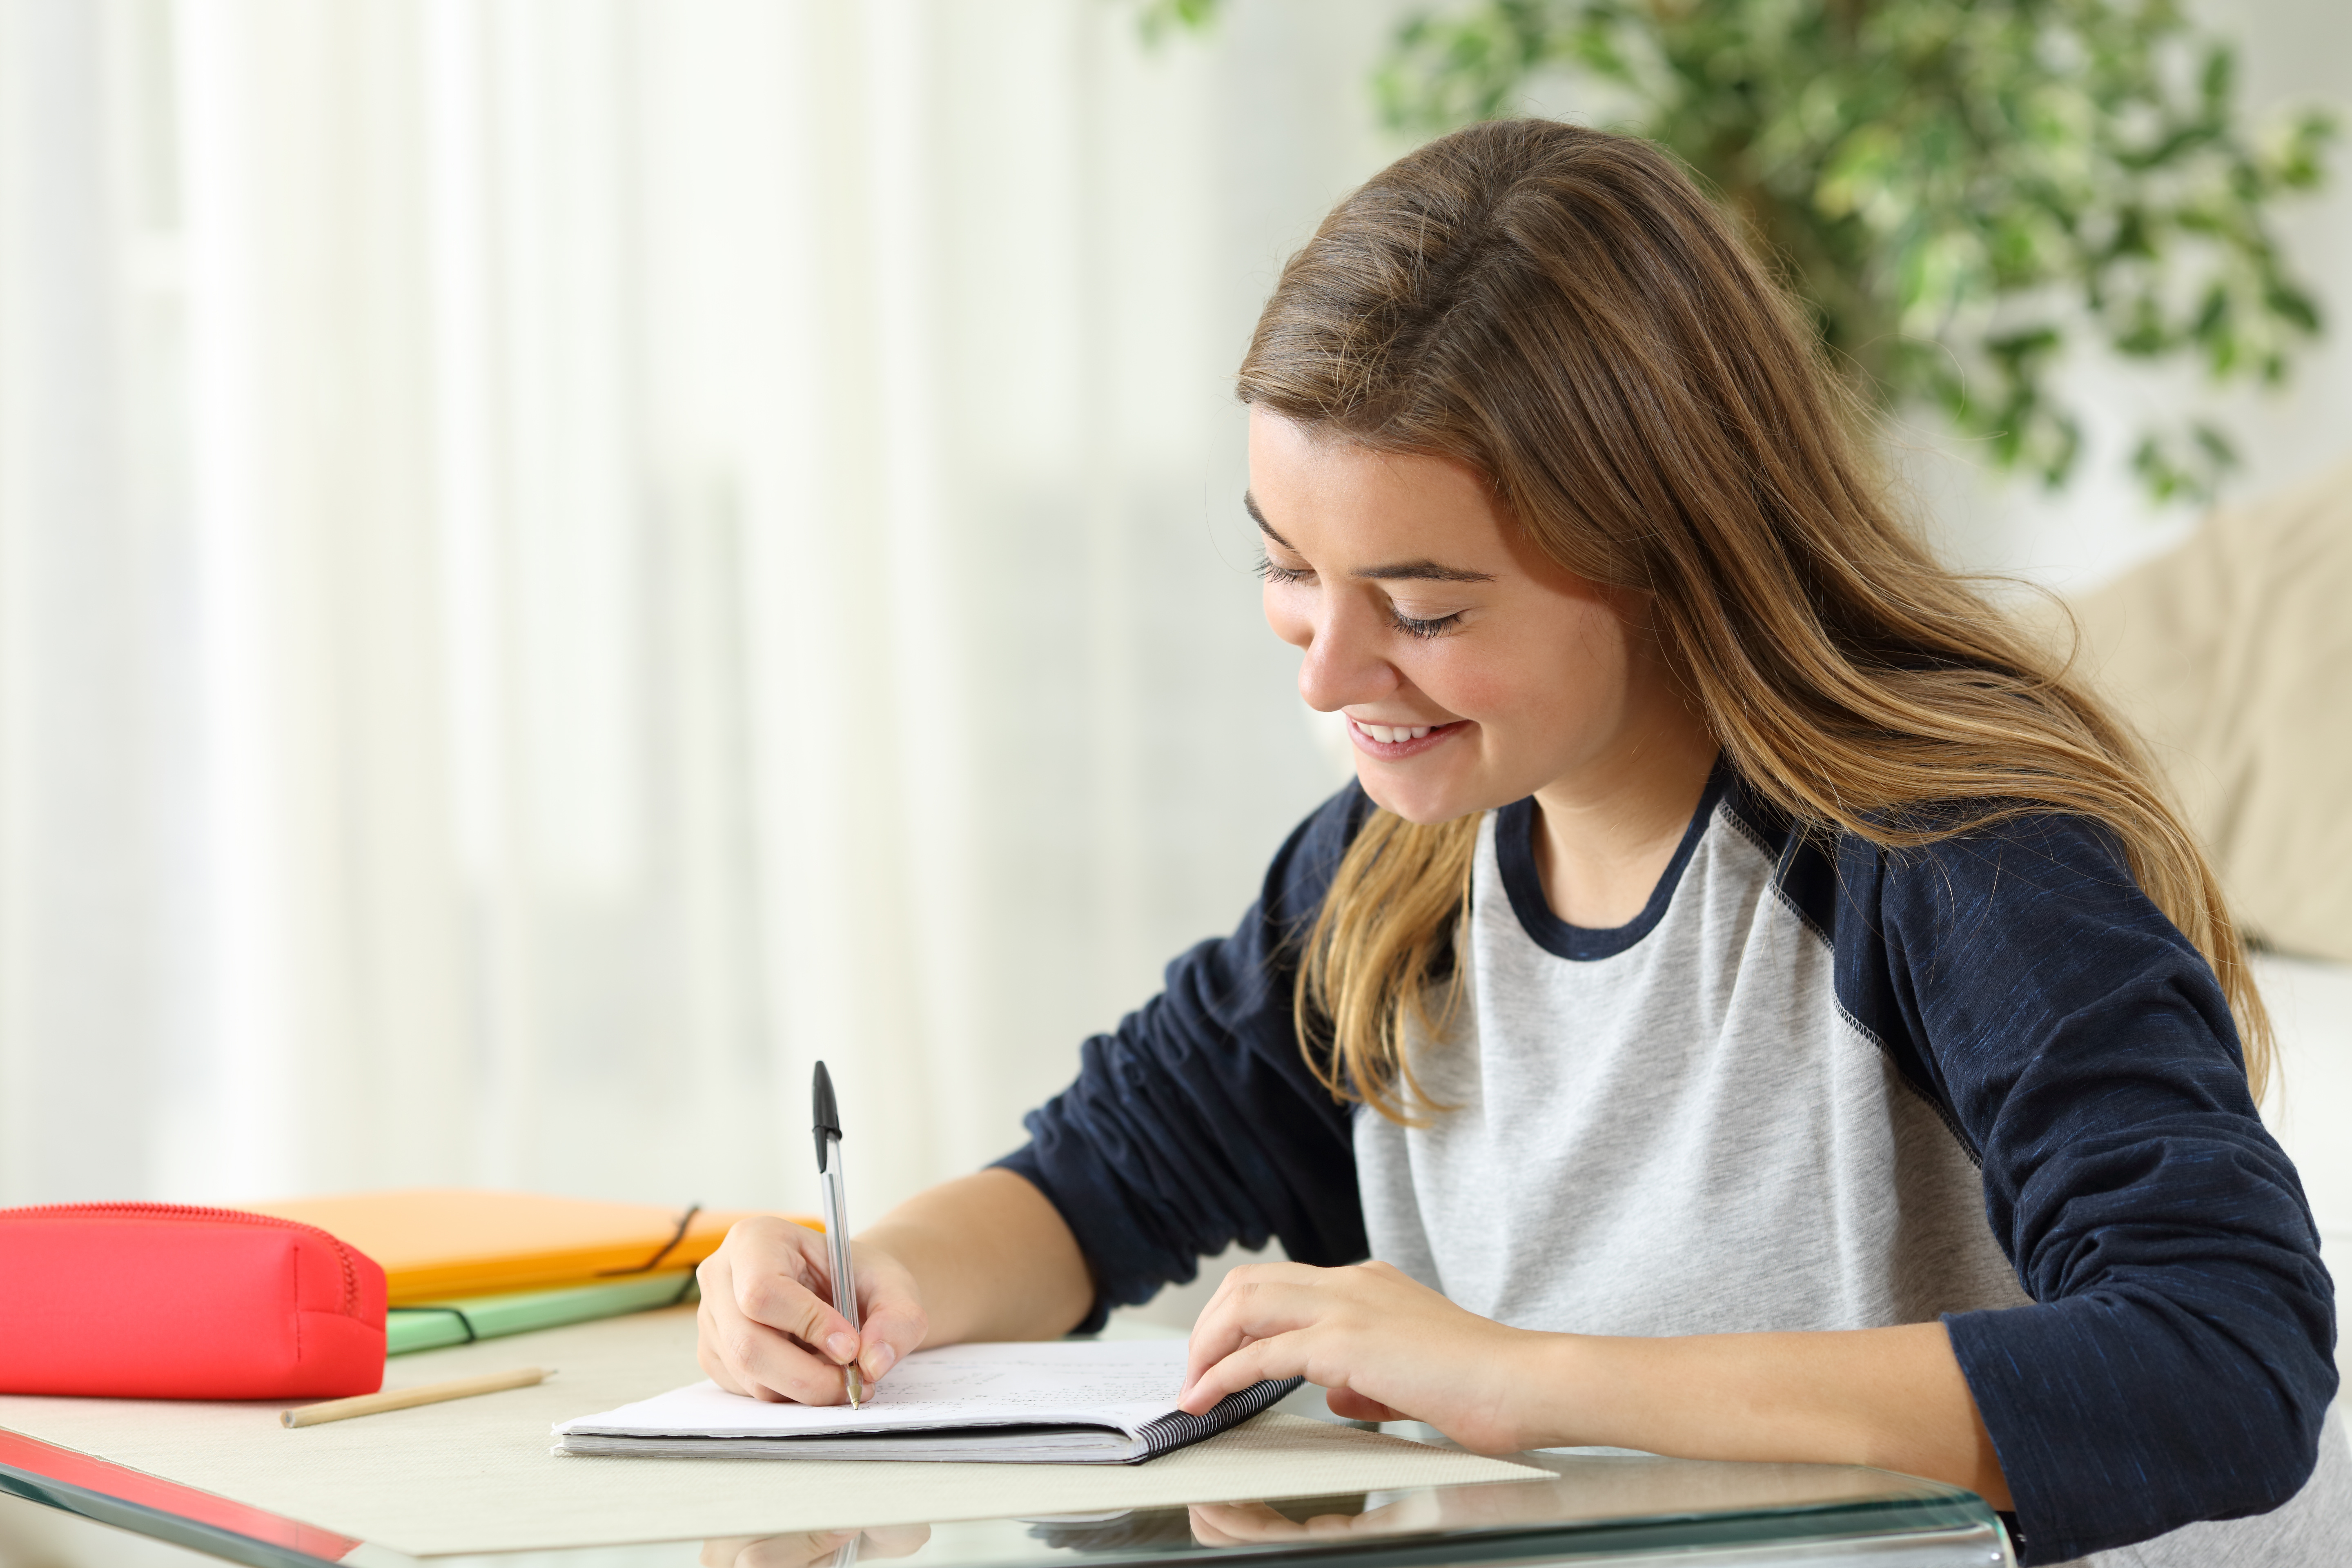 Six Top Note Taking Strategies for College Students - Exam Study